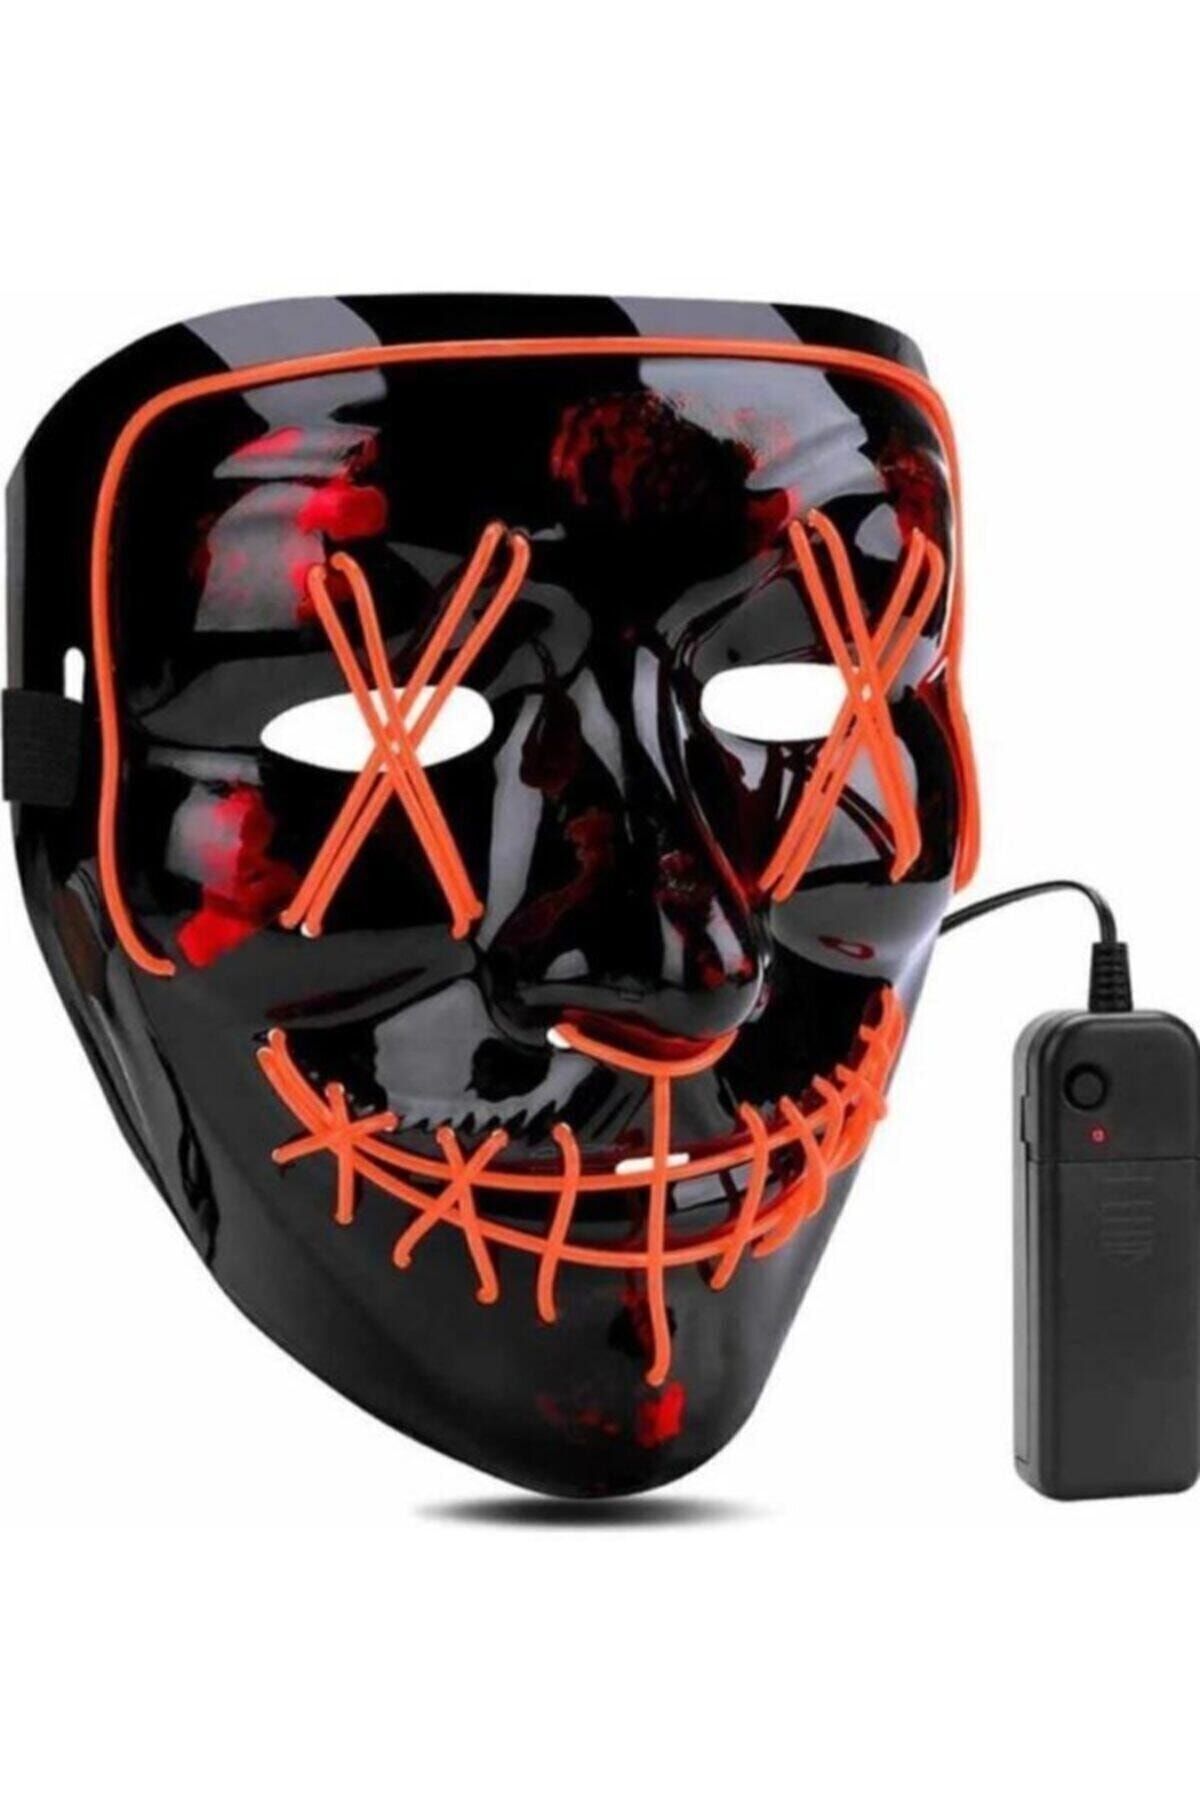 Hallowen Led Lighted Neon Mask 3 Modes Party Fun Mask